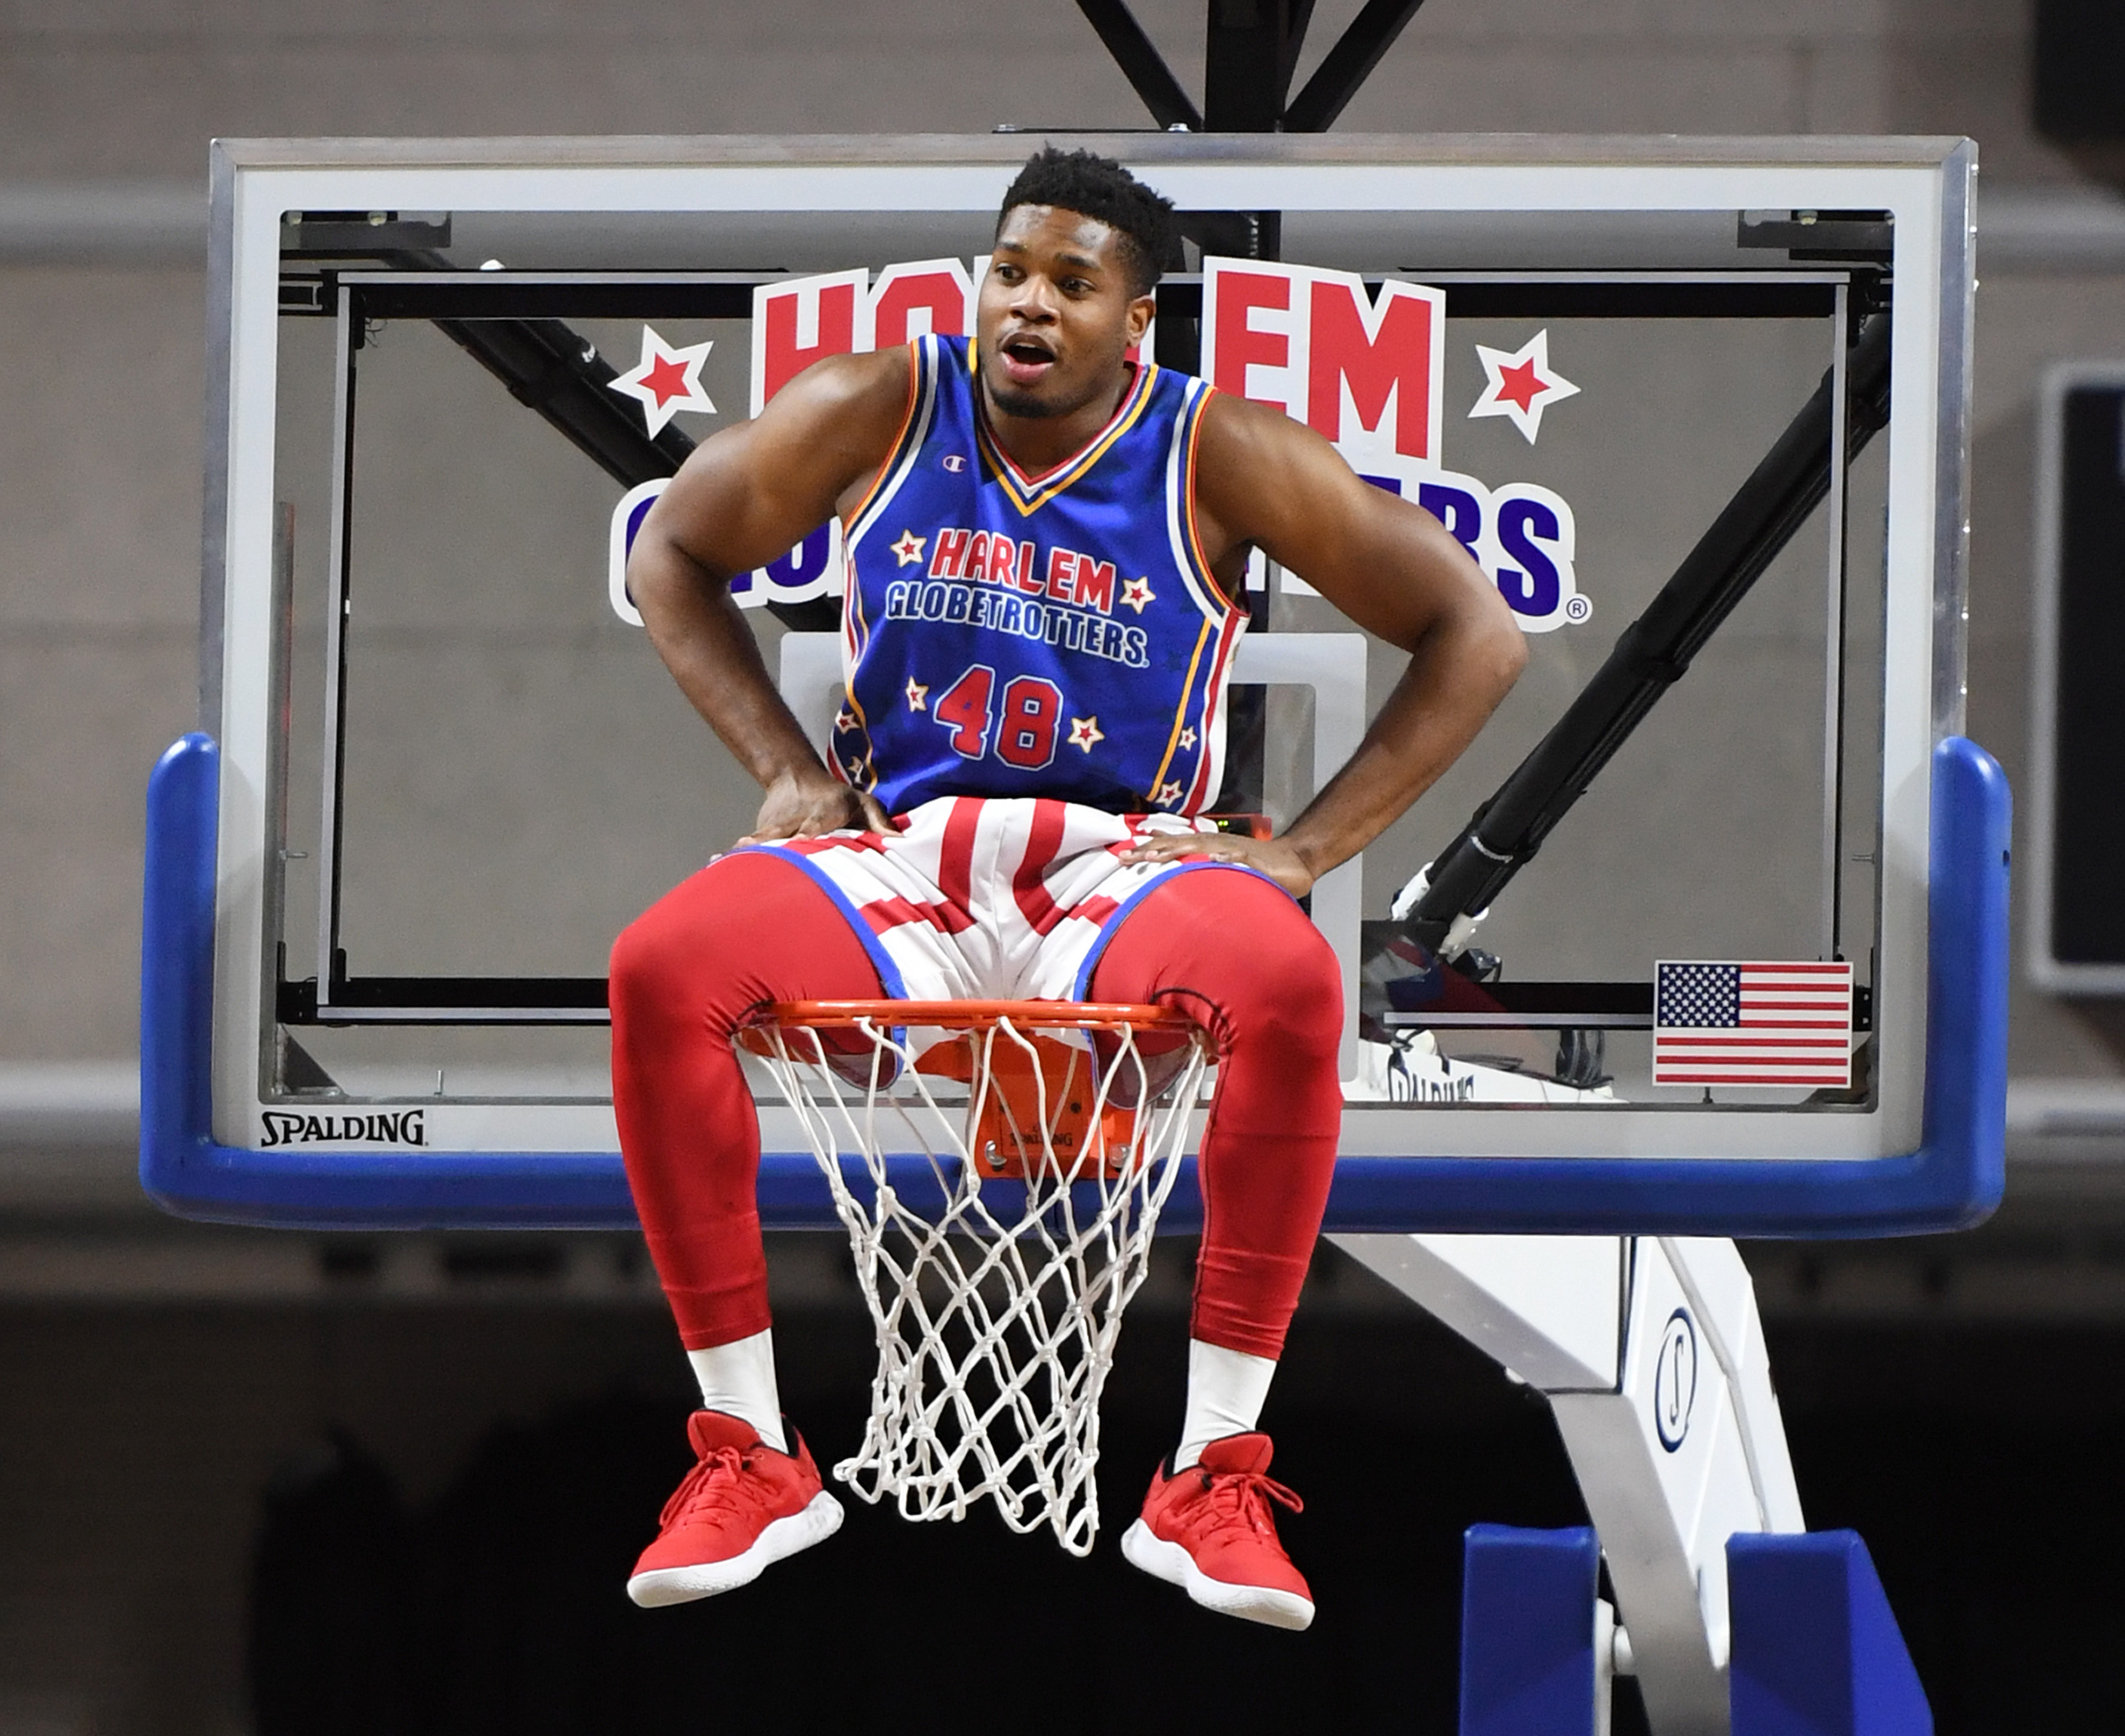 How Much Money do Harlem Globetrotters Players Make?